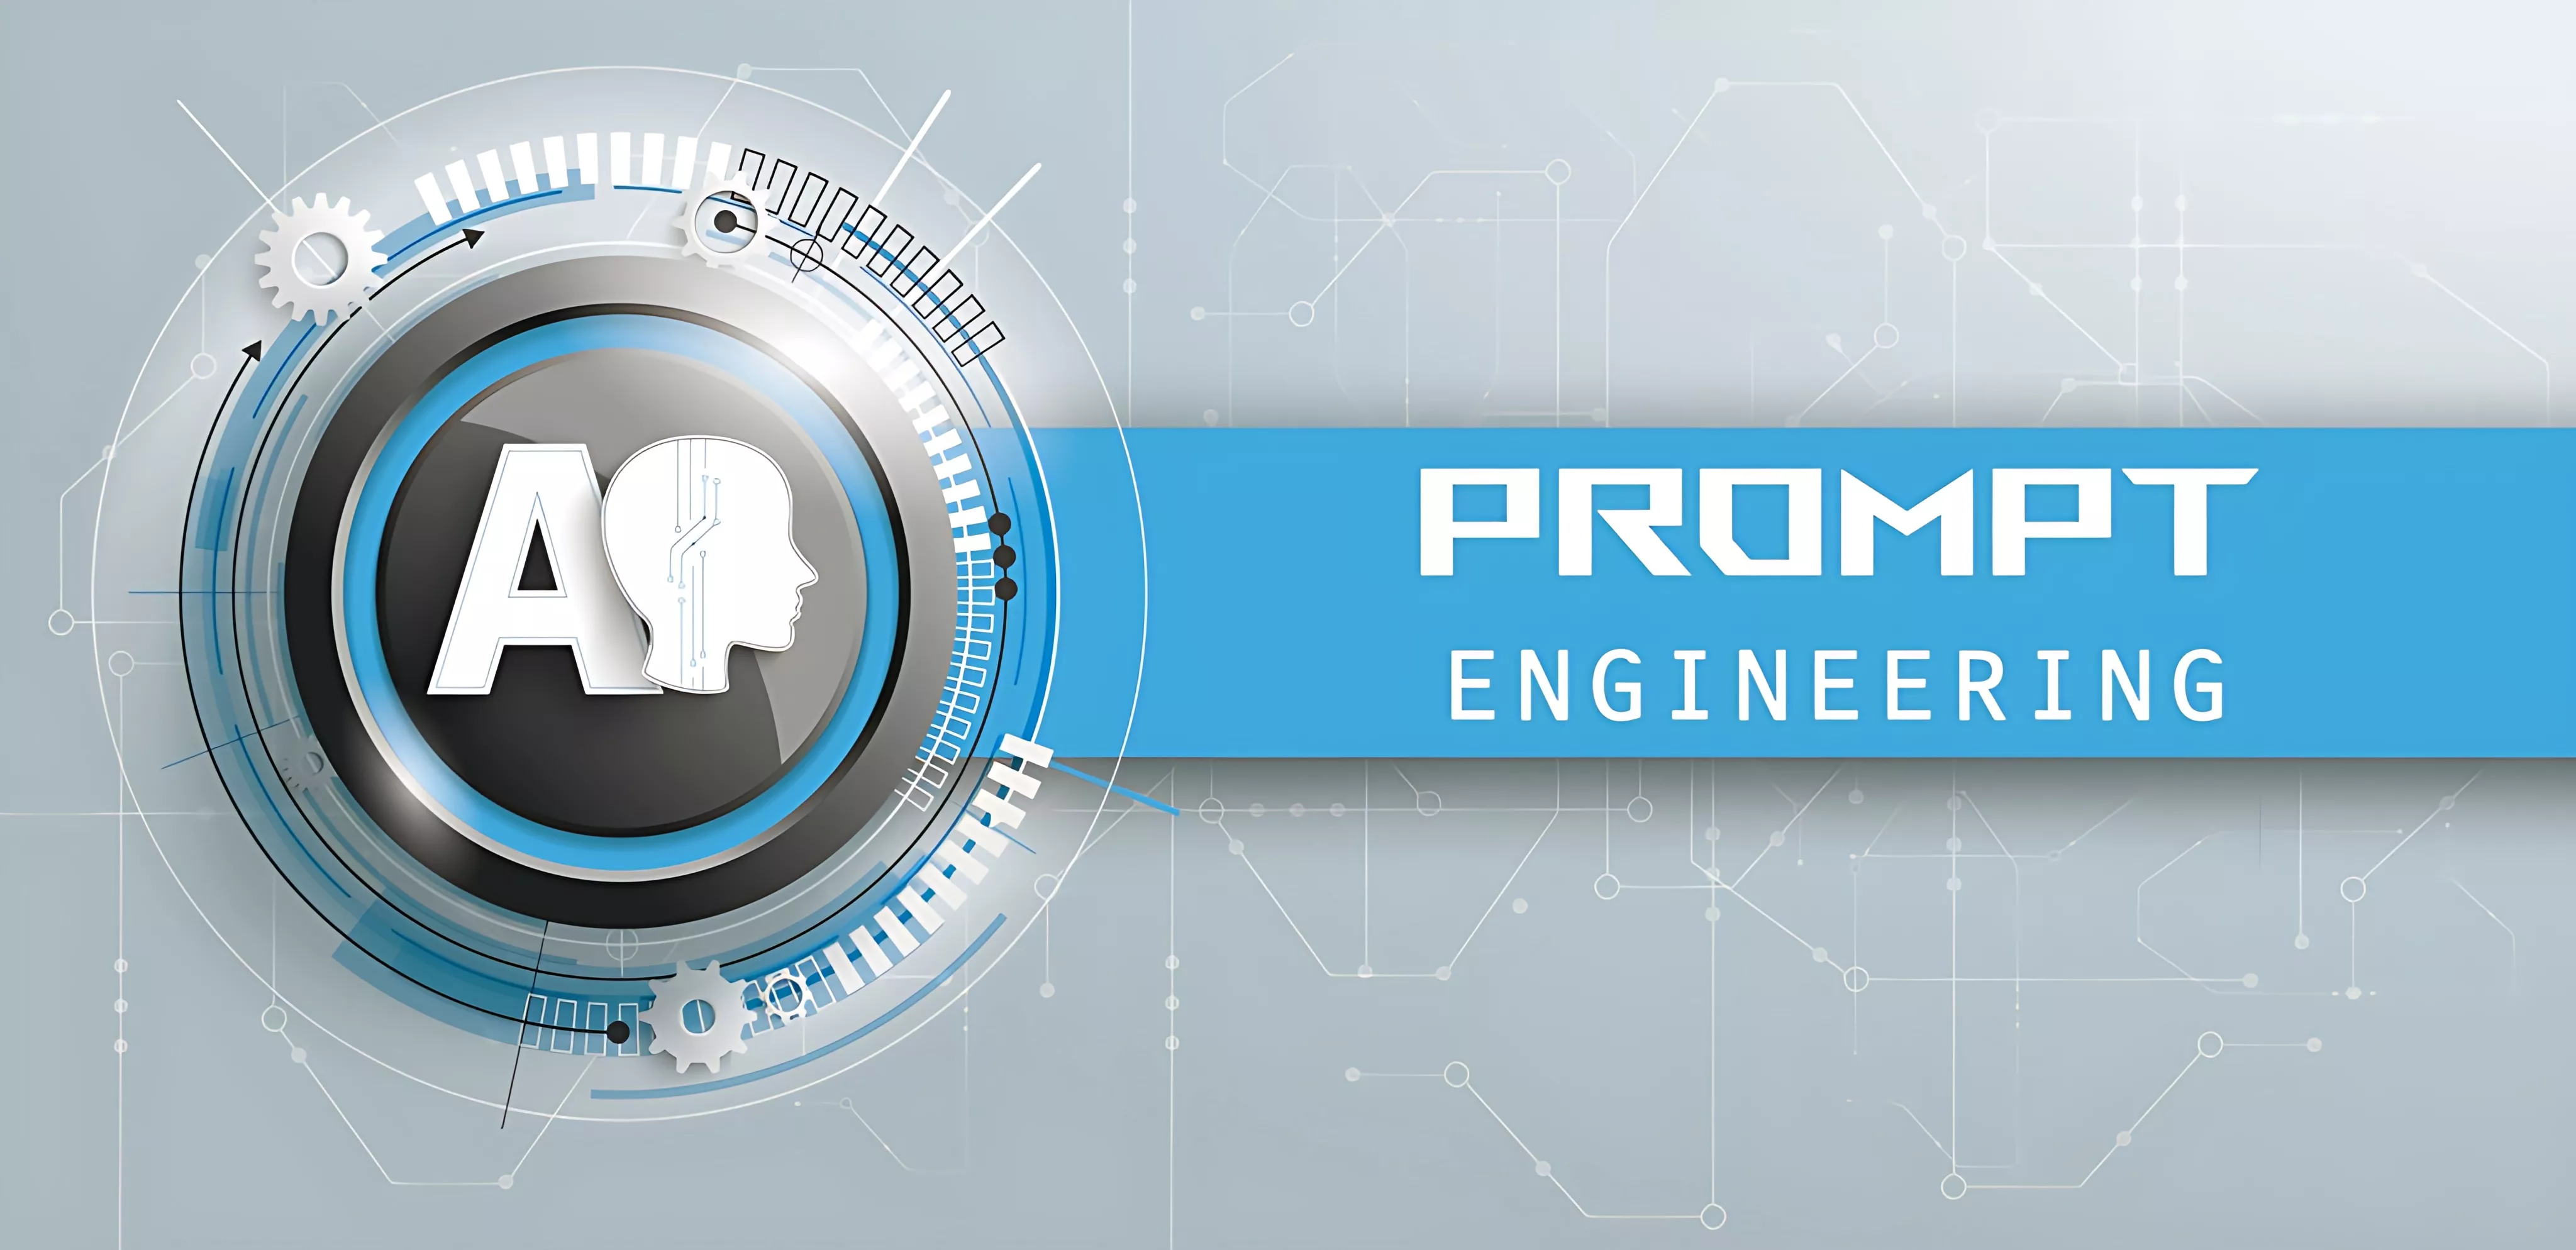 What is an AI prompt engineer and why do I need one for my business?